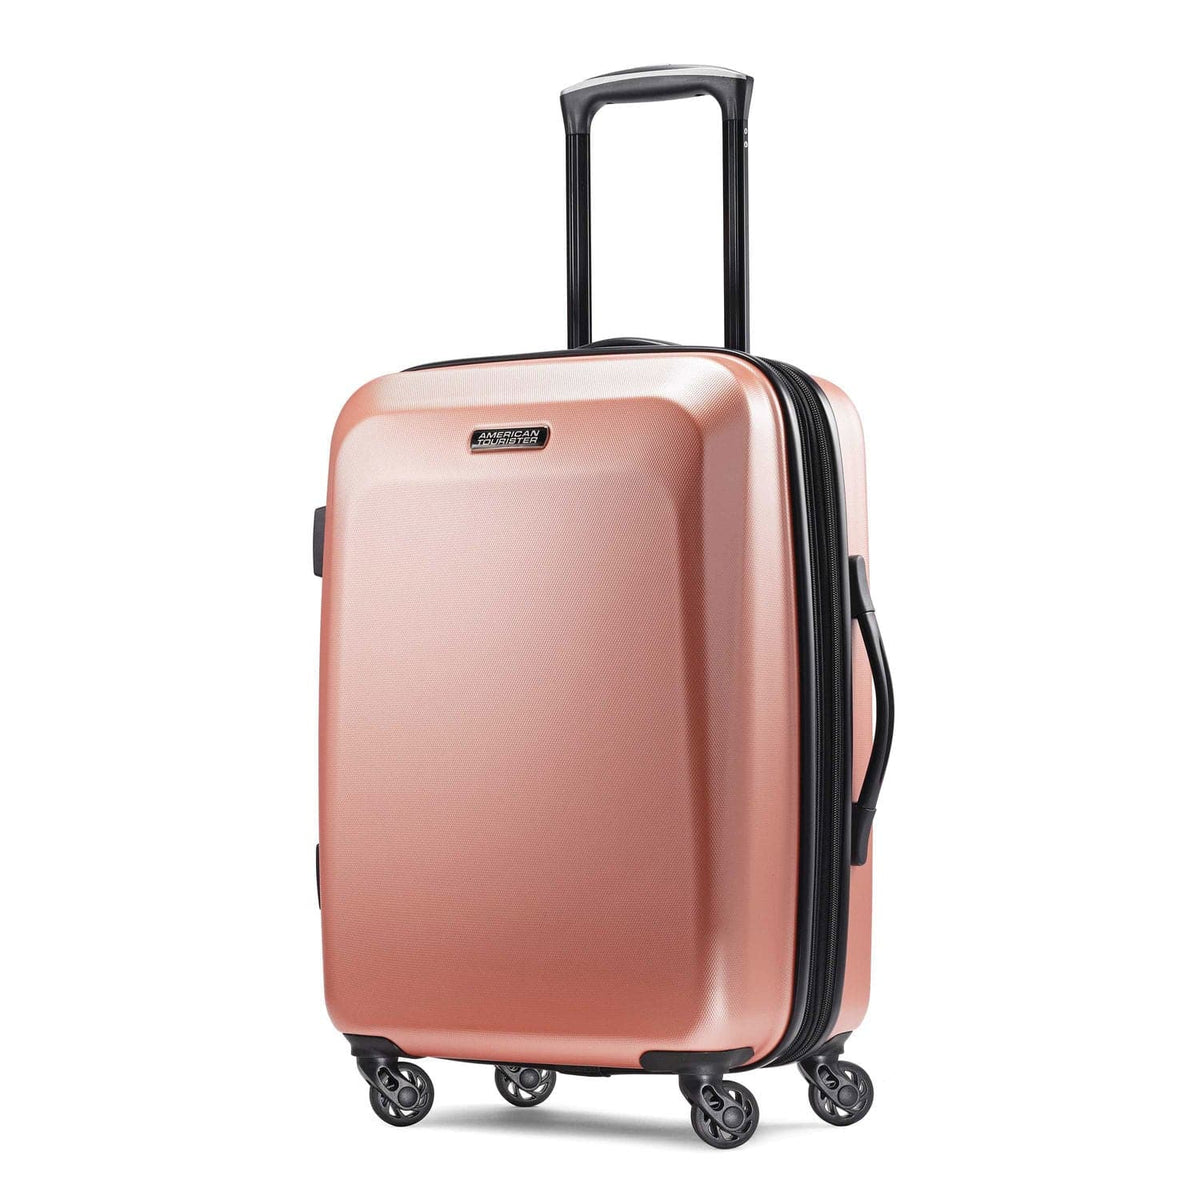 American Tourister Moonlight 21" Spinner Luggage